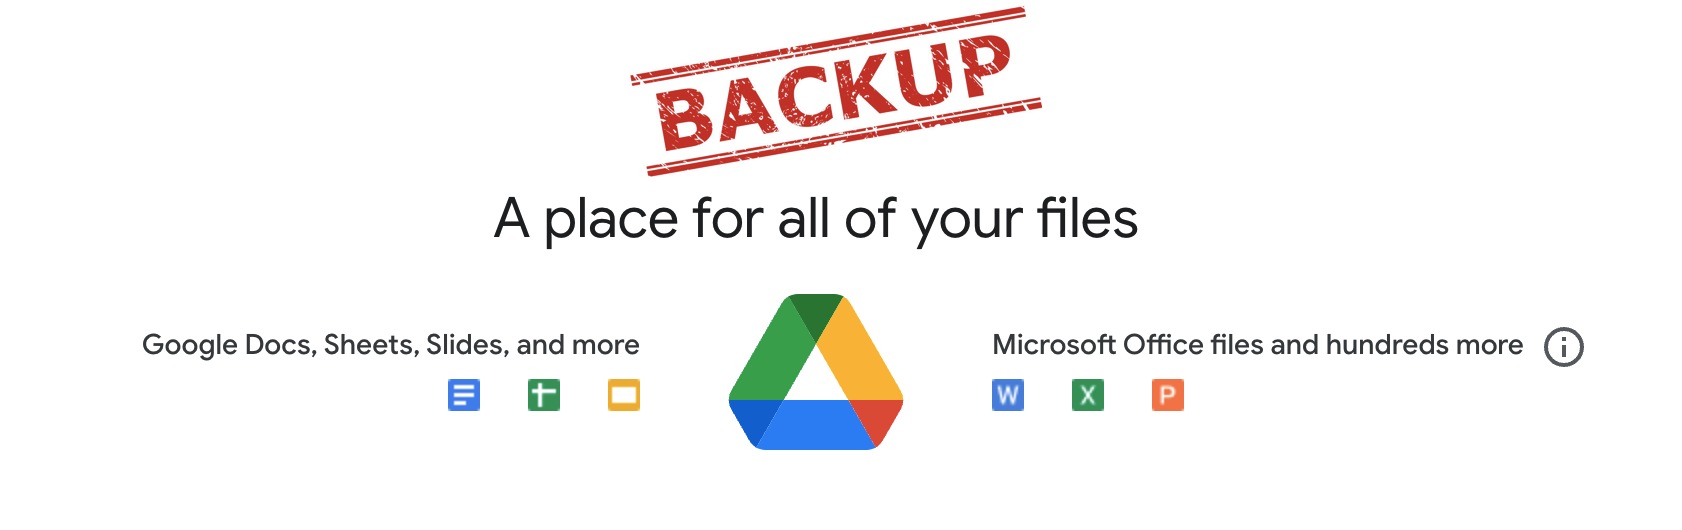 How to Backup Google Drive Files